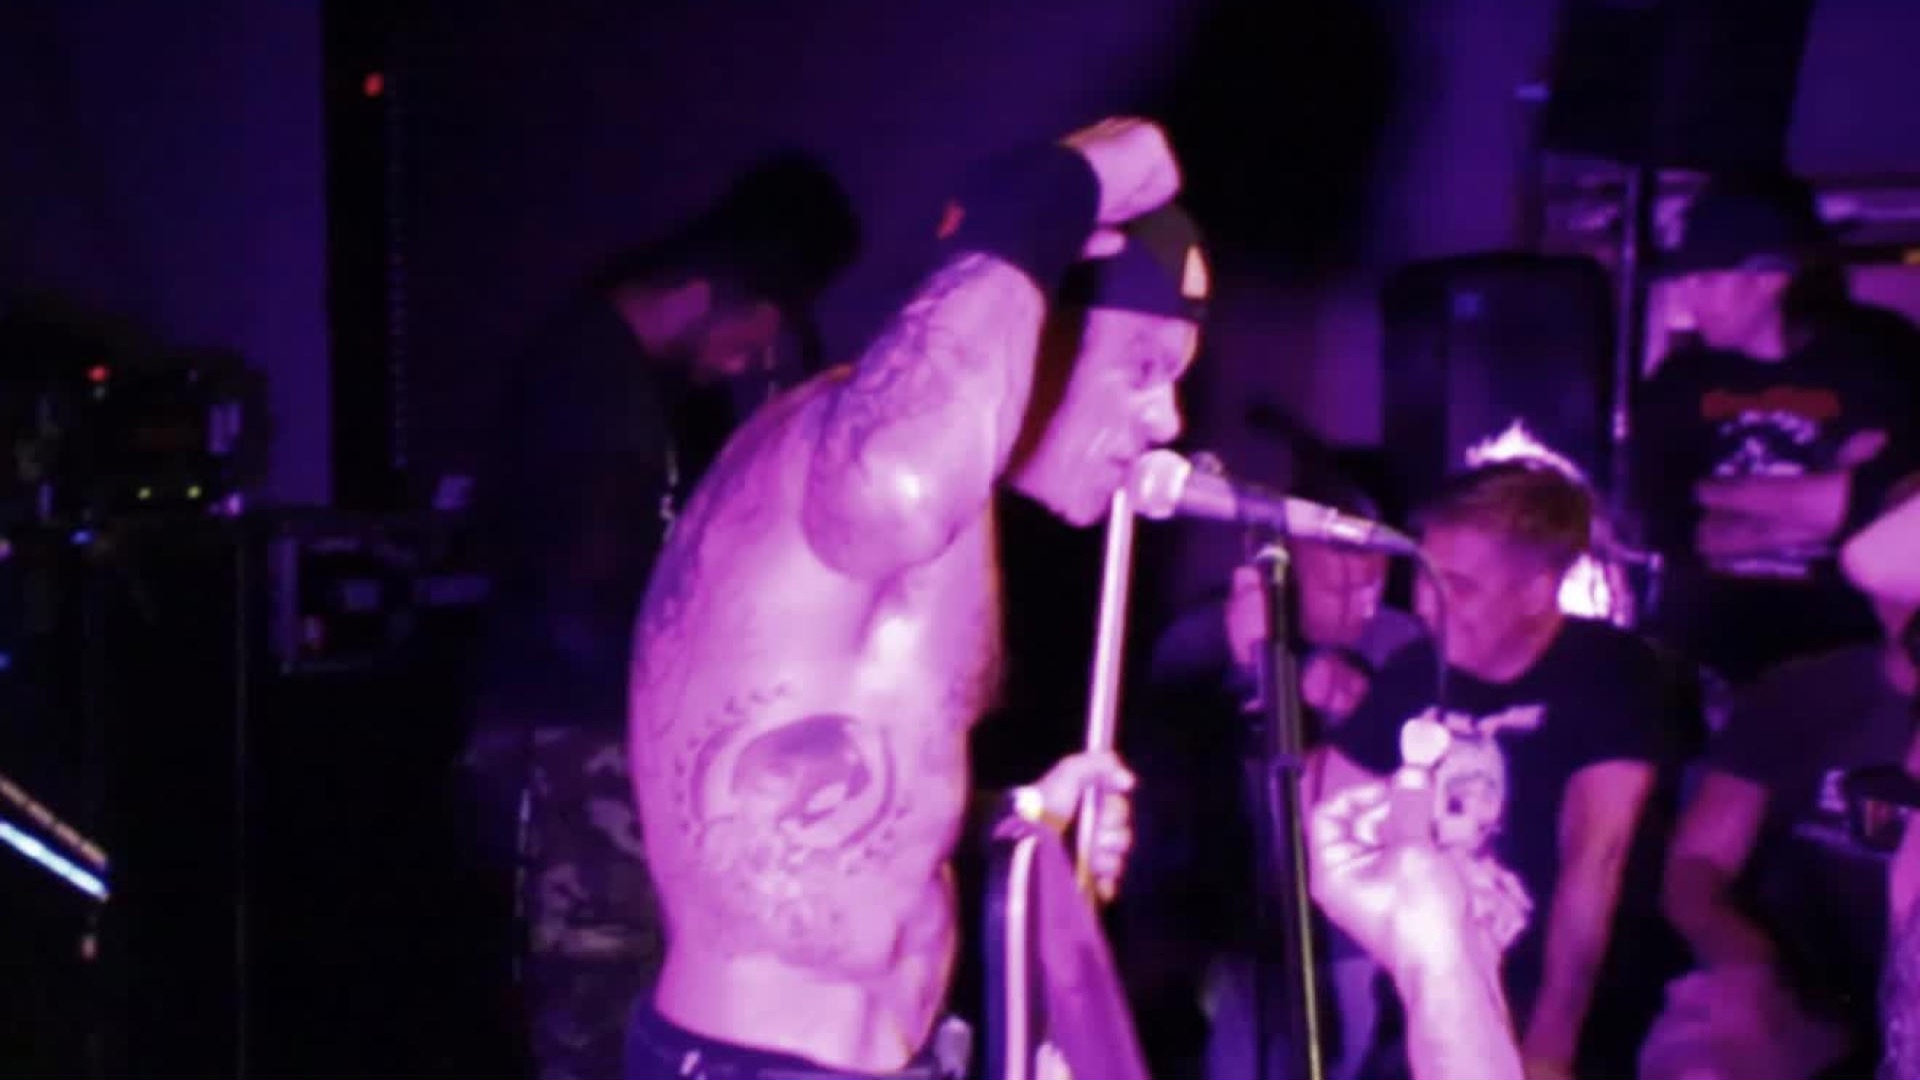 CRO-MAGS Release Official Video for New Single Life On Earth